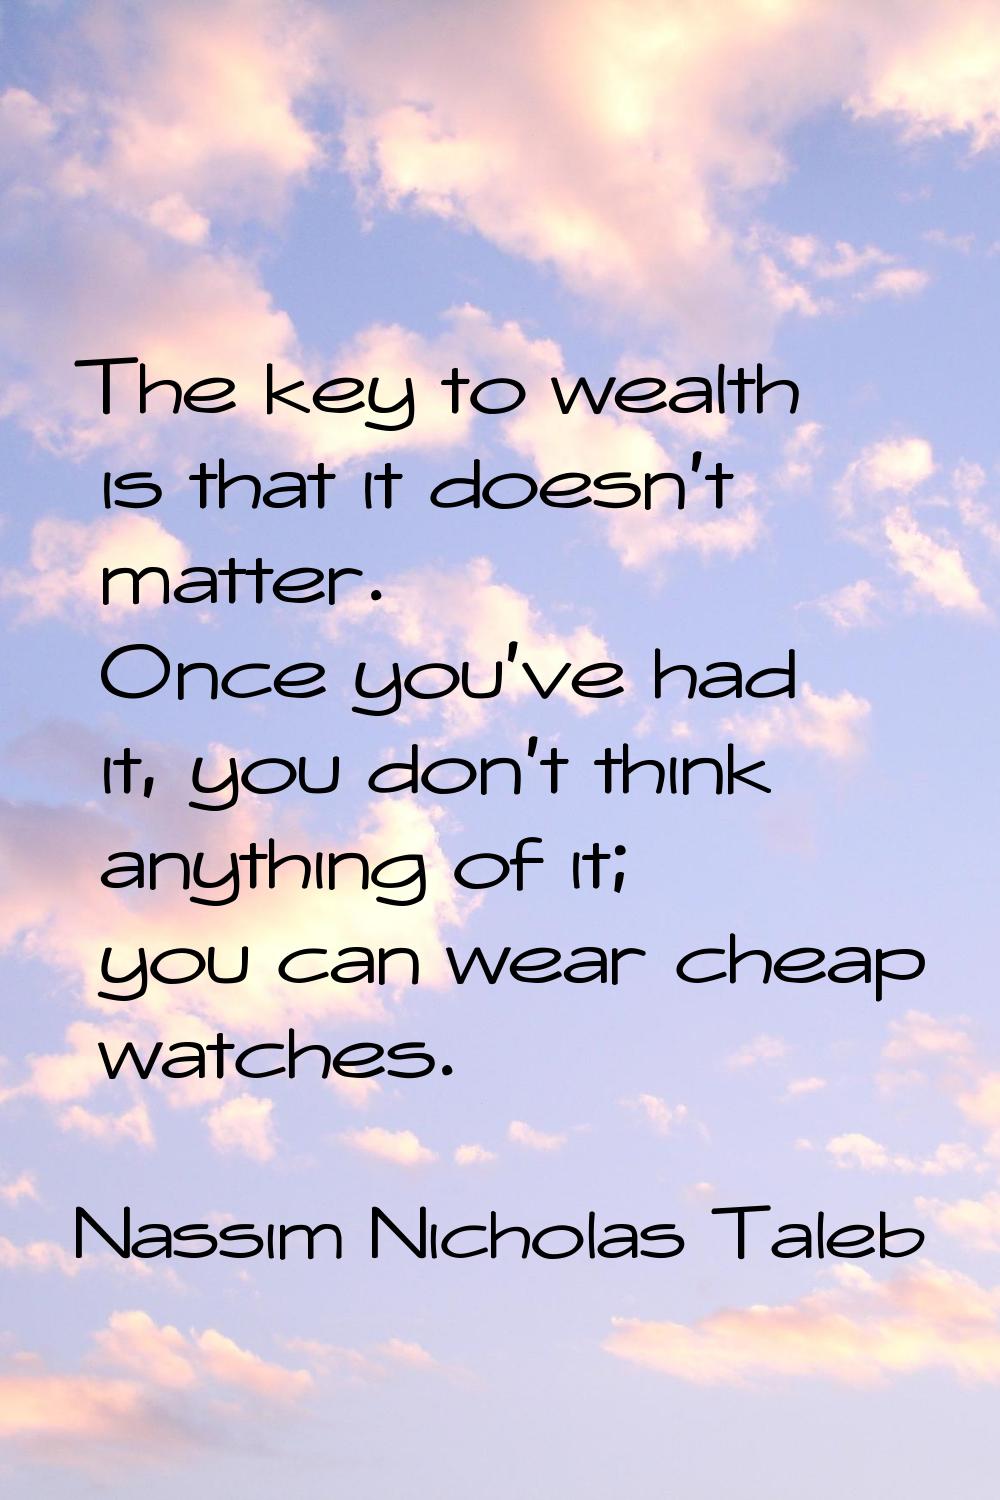 The key to wealth is that it doesn't matter. Once you've had it, you don't think anything of it; yo